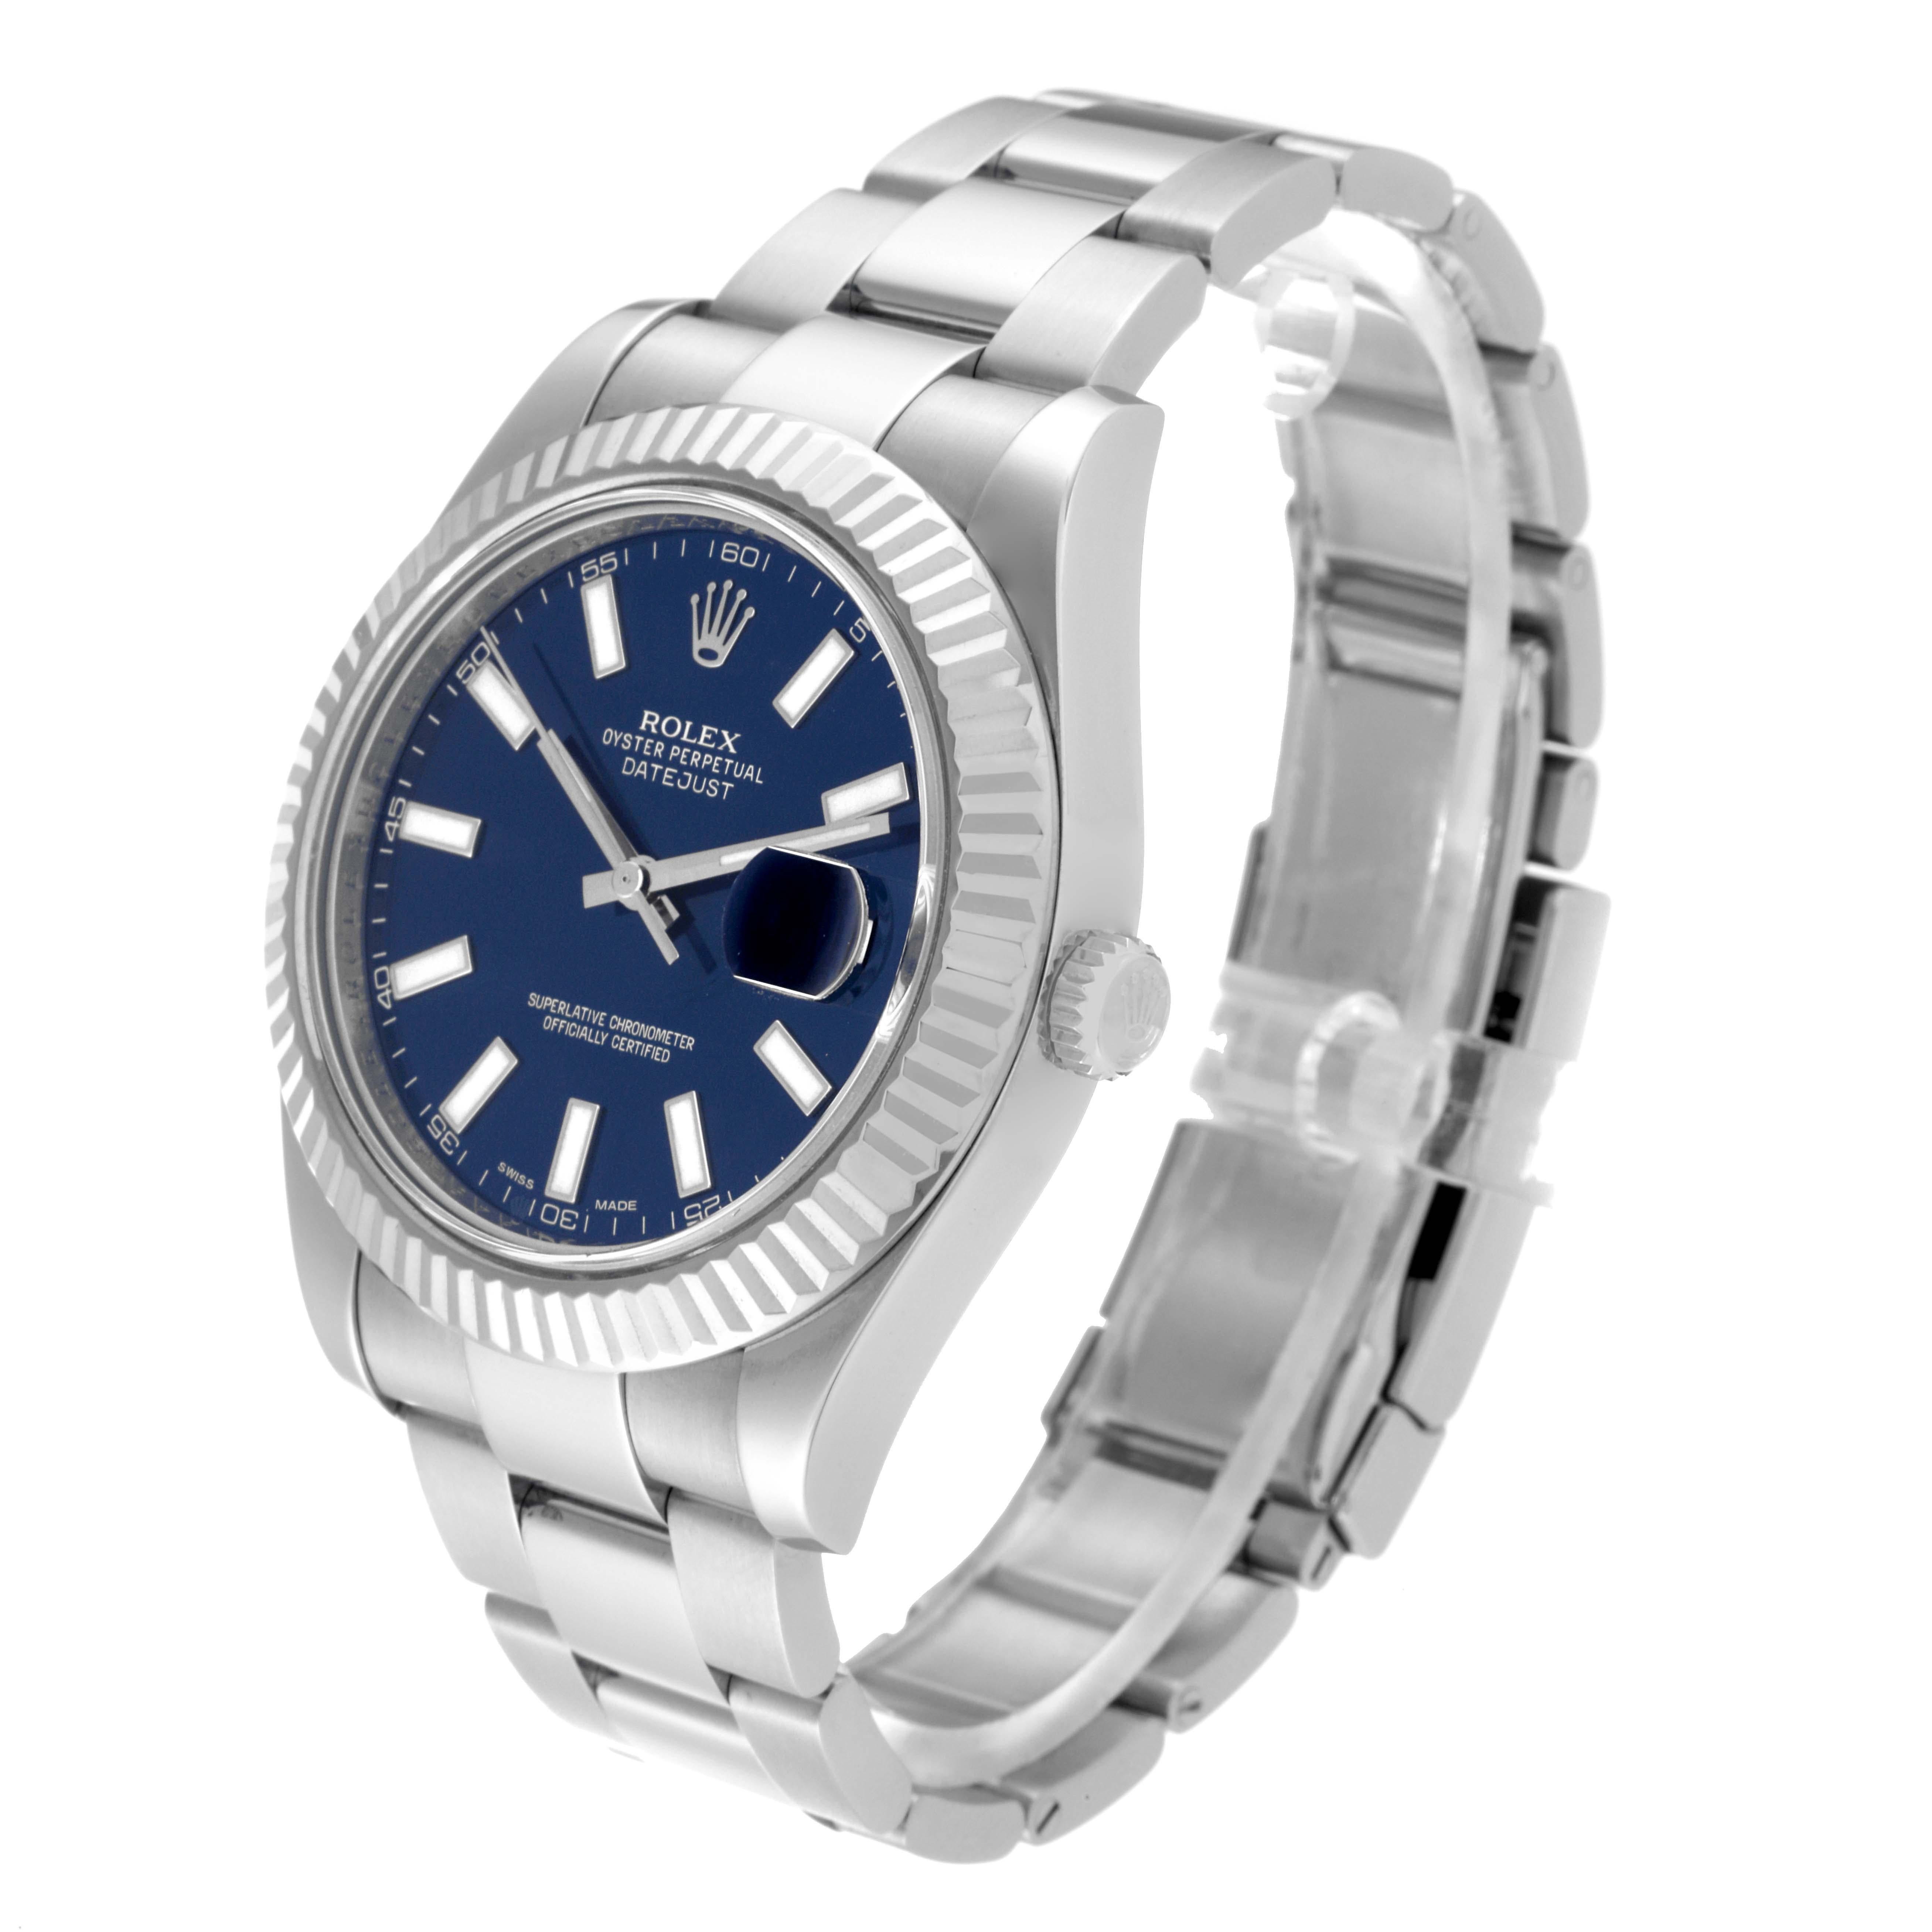 Rolex Datejust II 41 Blue Dial Steel White Gold Mens Watch 116334 For Sale 7